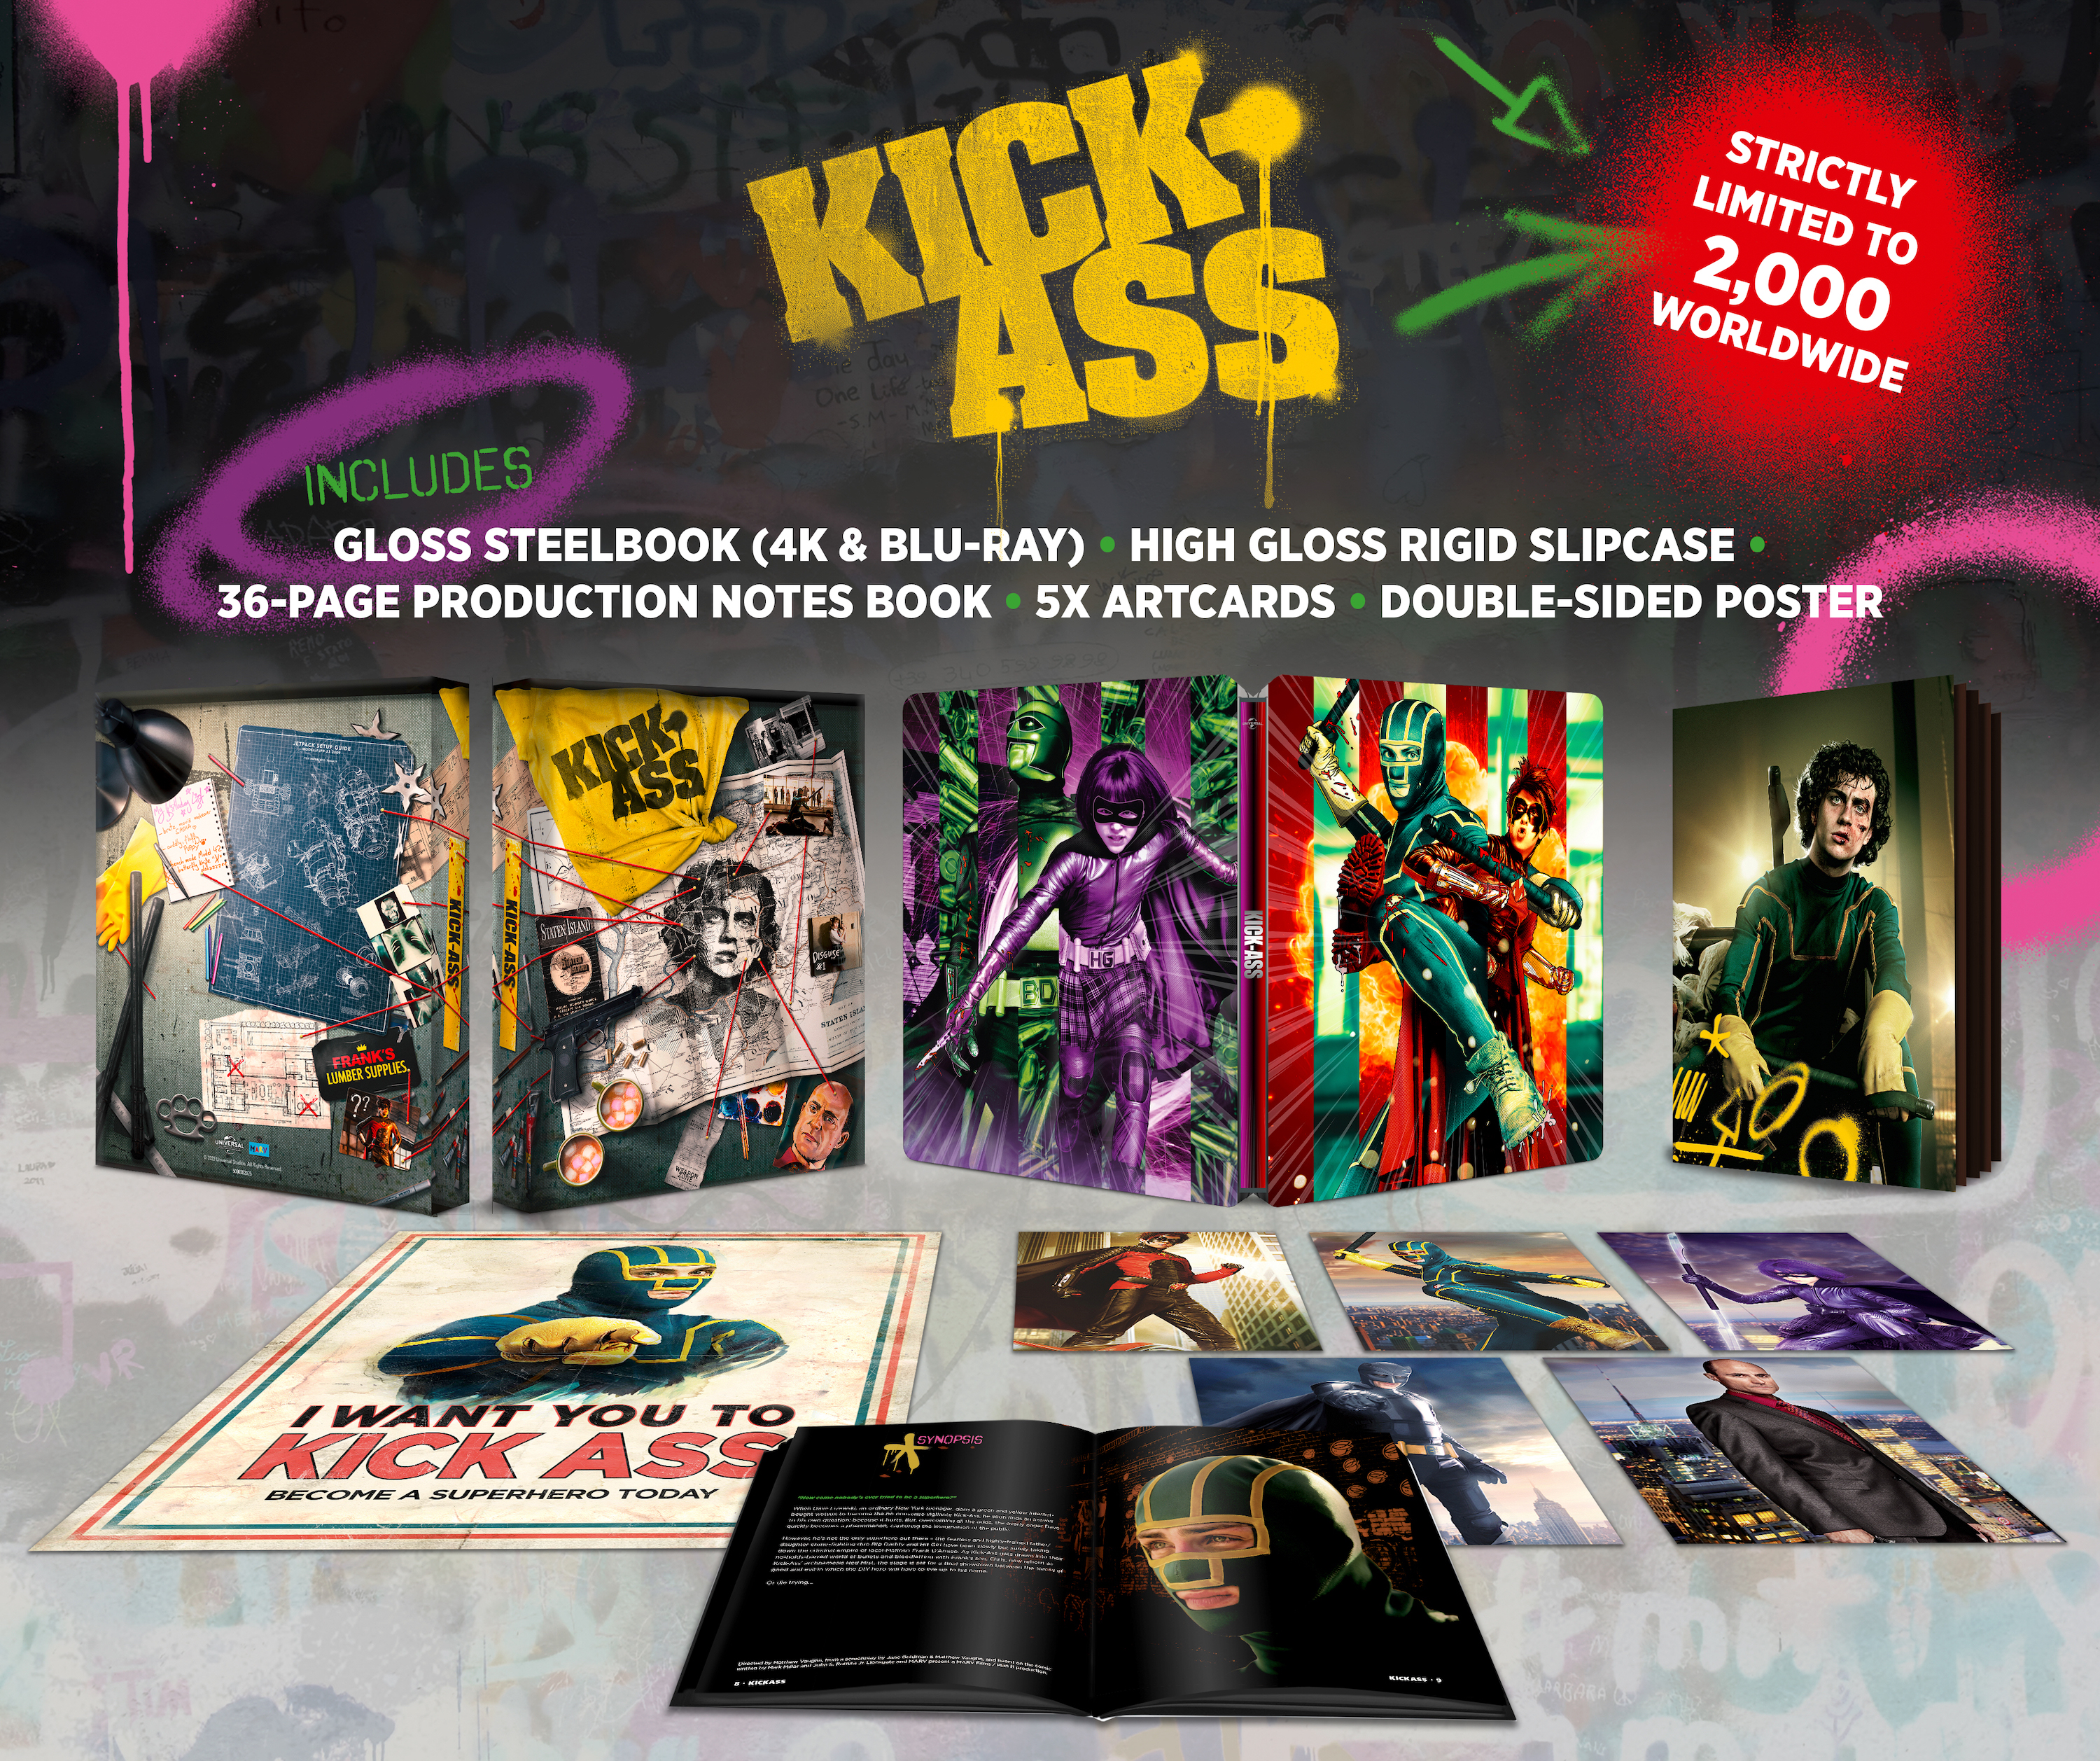 Image showing all the content of the Steelbook set. Gloss Steelbook 4K and Blu Ray. High Gloss Rigid Slipcase. 36 Page Production Notes Book. 5 Artcards. Double Sided Poster. Strictly Limited to 2000 Units Worldwide.